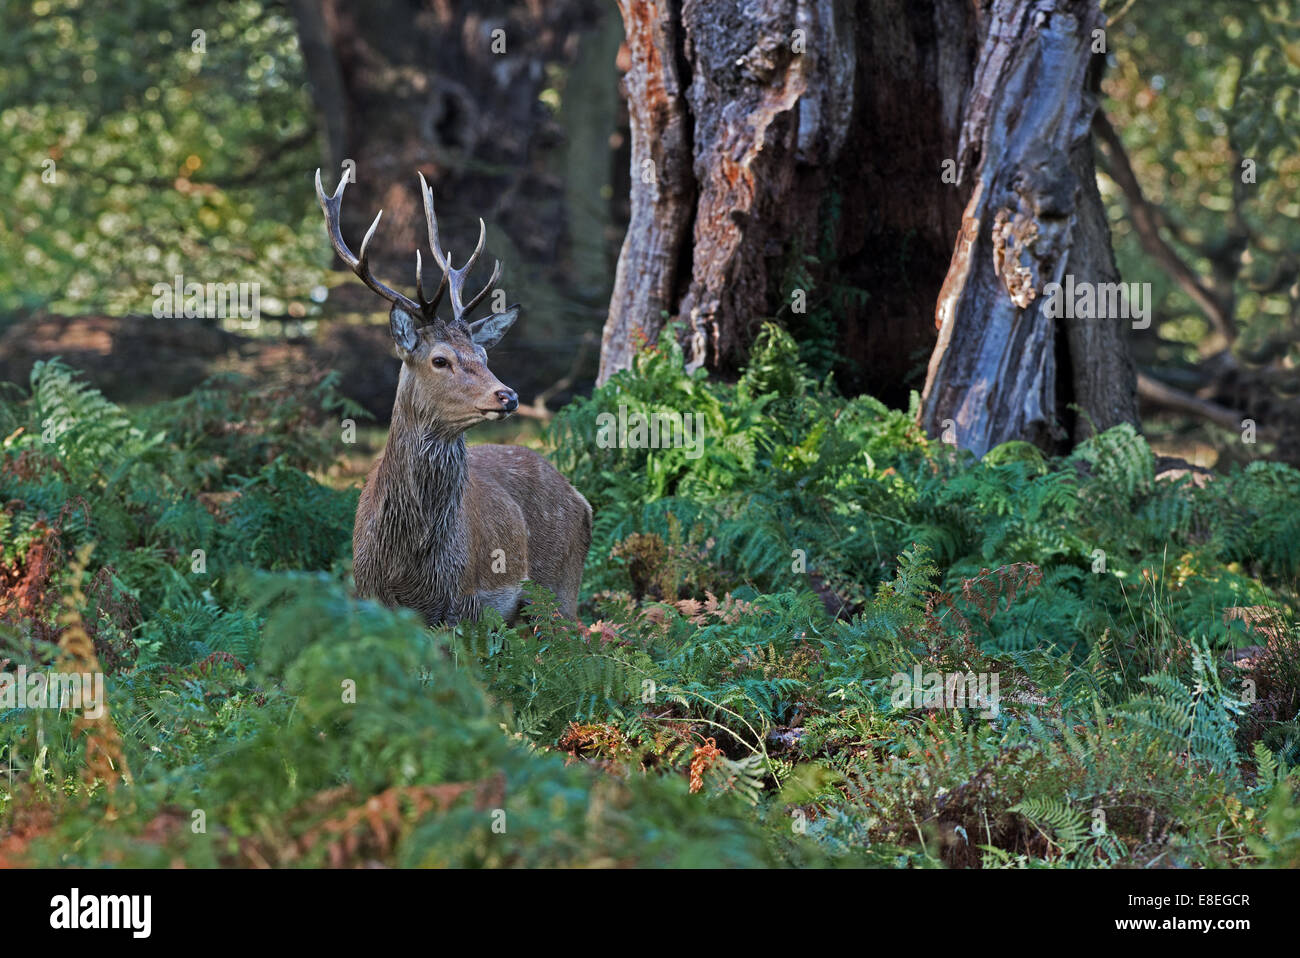 Young  Male Red Deer (Stag)- Cervus elaphus amongst bracken at Richmond Park, during the rutting season. Uk Stock Photo